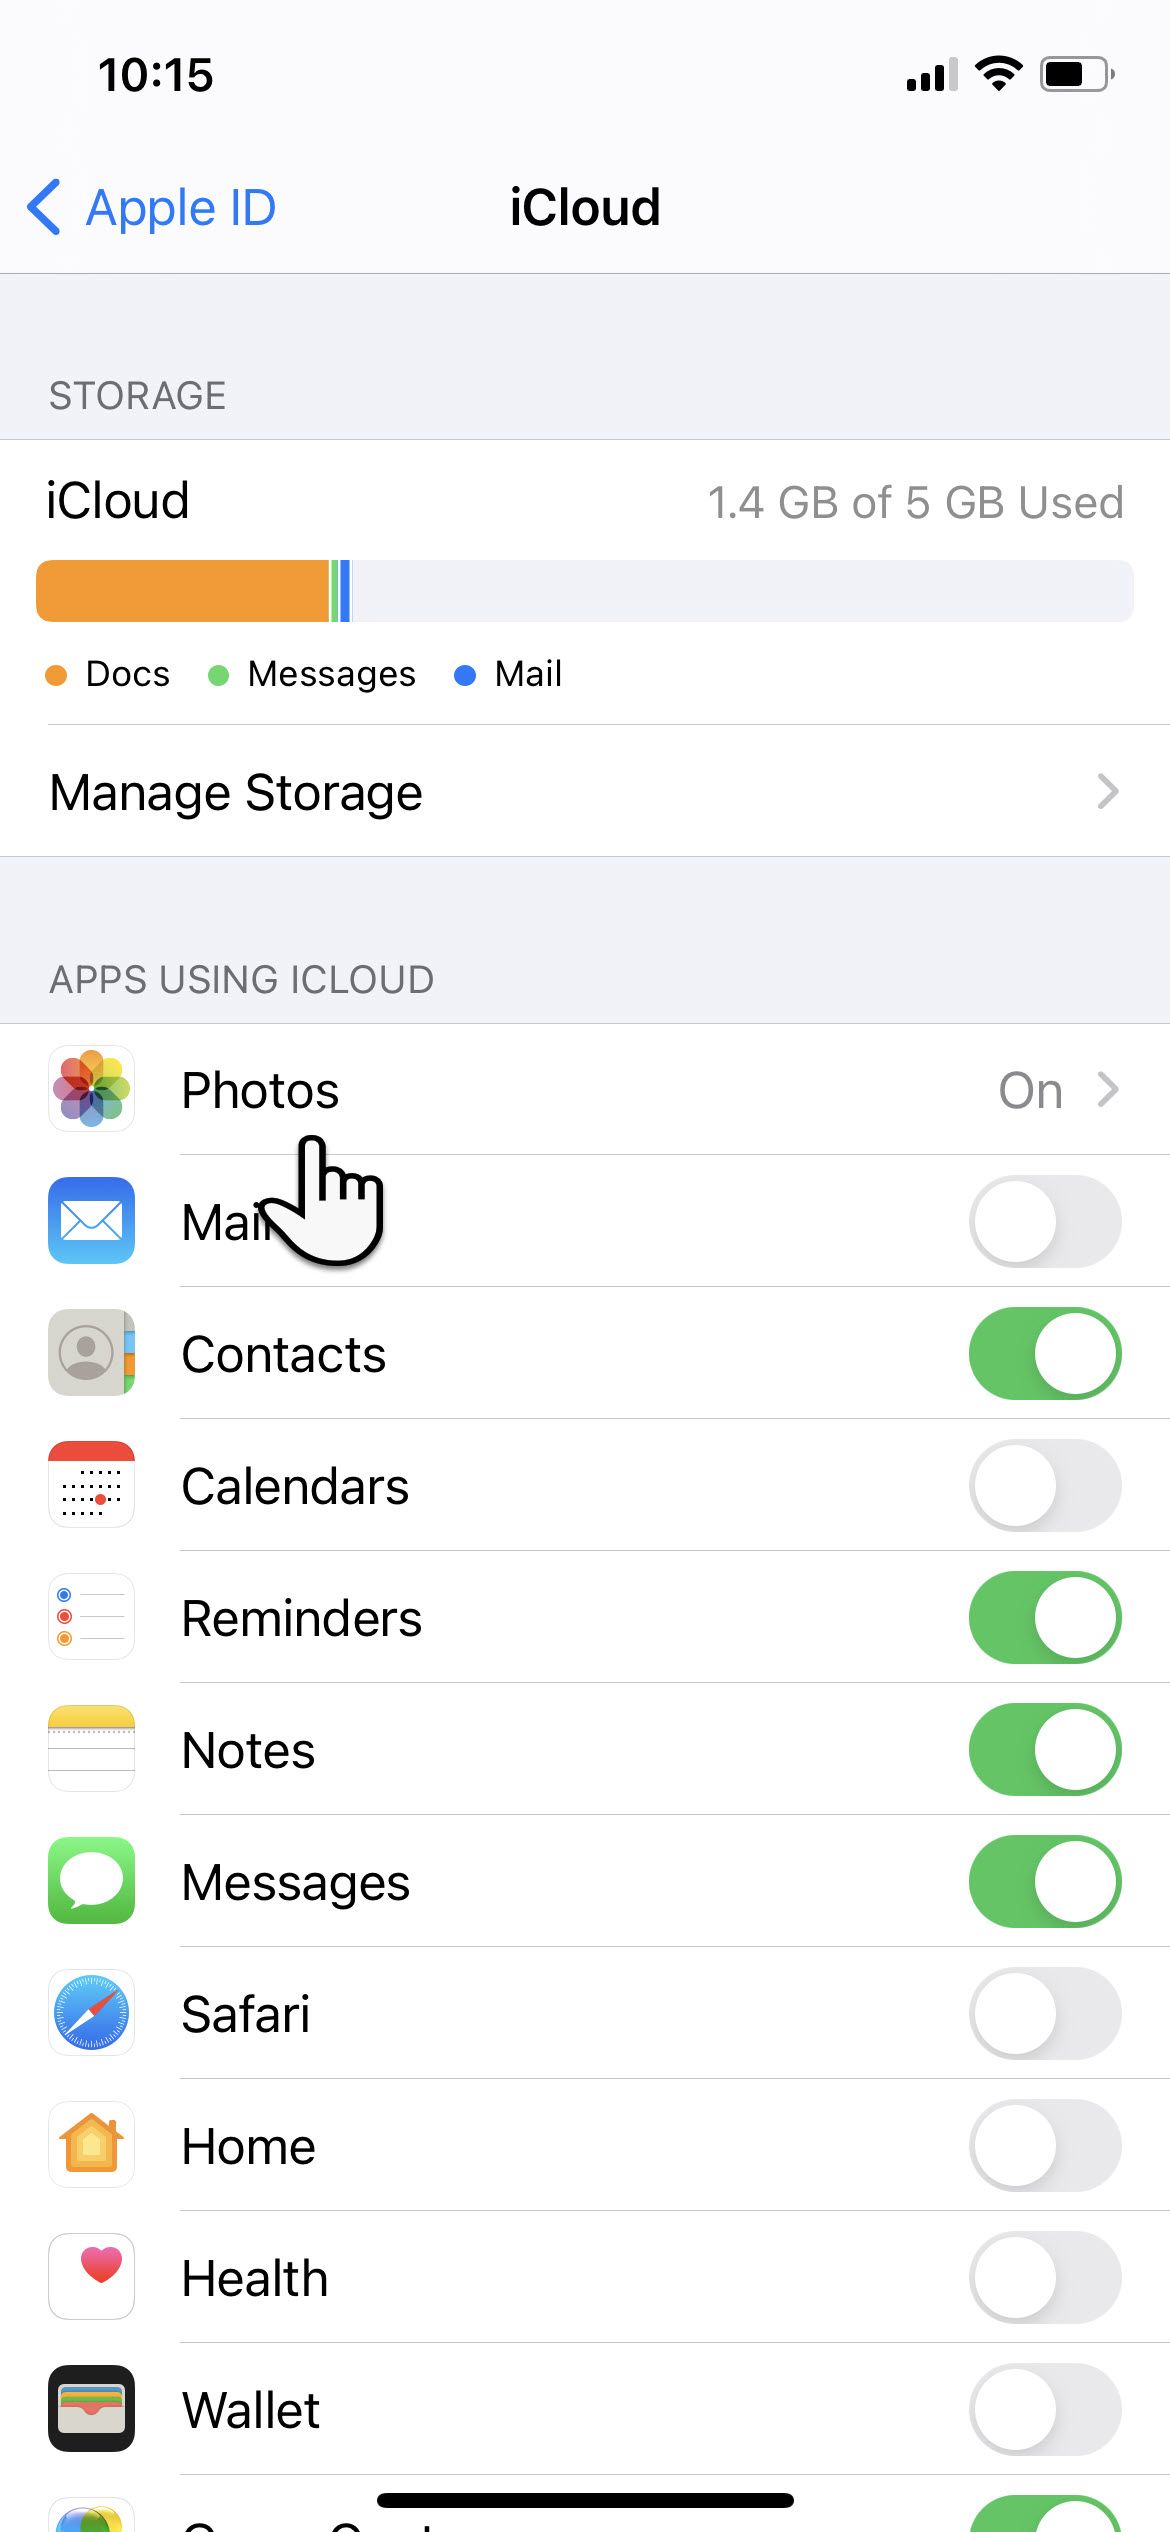 how to export photos from mac to iphone